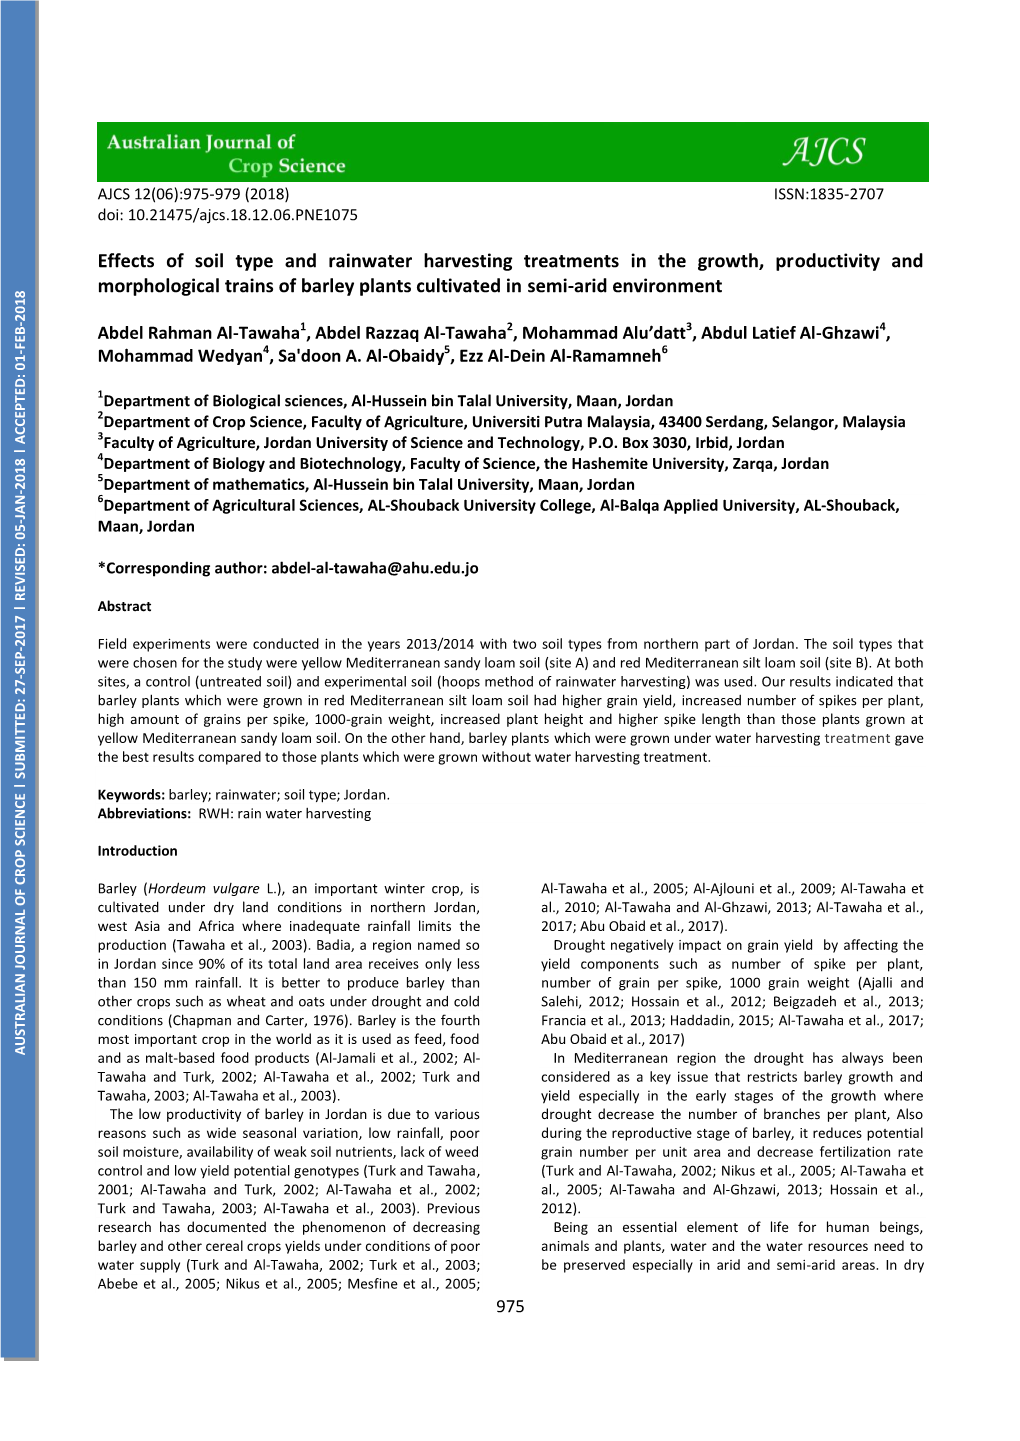 Effects of Soil Type and Rainwater Harvesting Treatments in the Growth, Productivity And